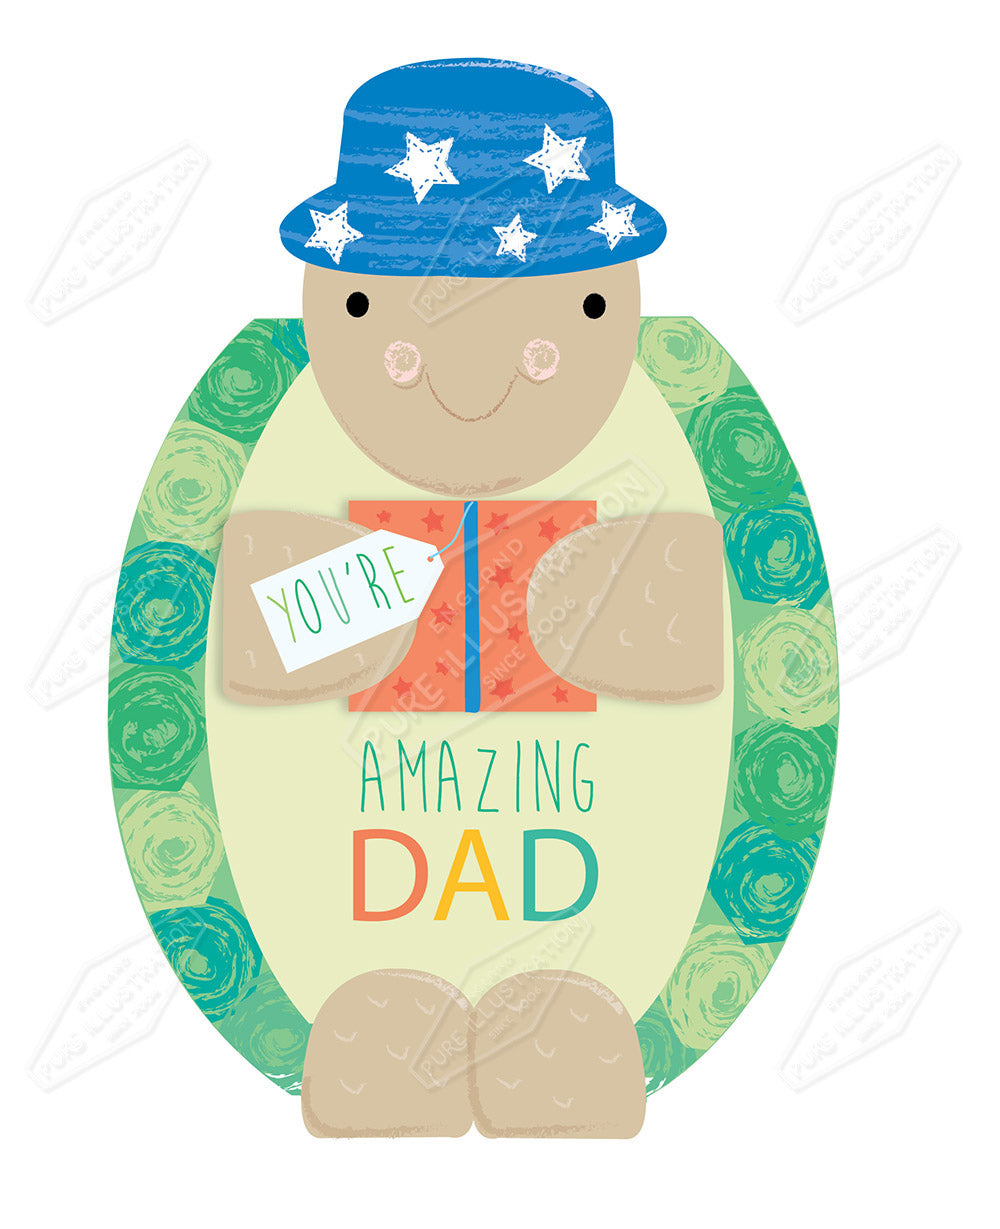 00032841AMC - Amanda McDonough is represented by Pure Art Licensing Agency - Father's Day Greeting Card Design